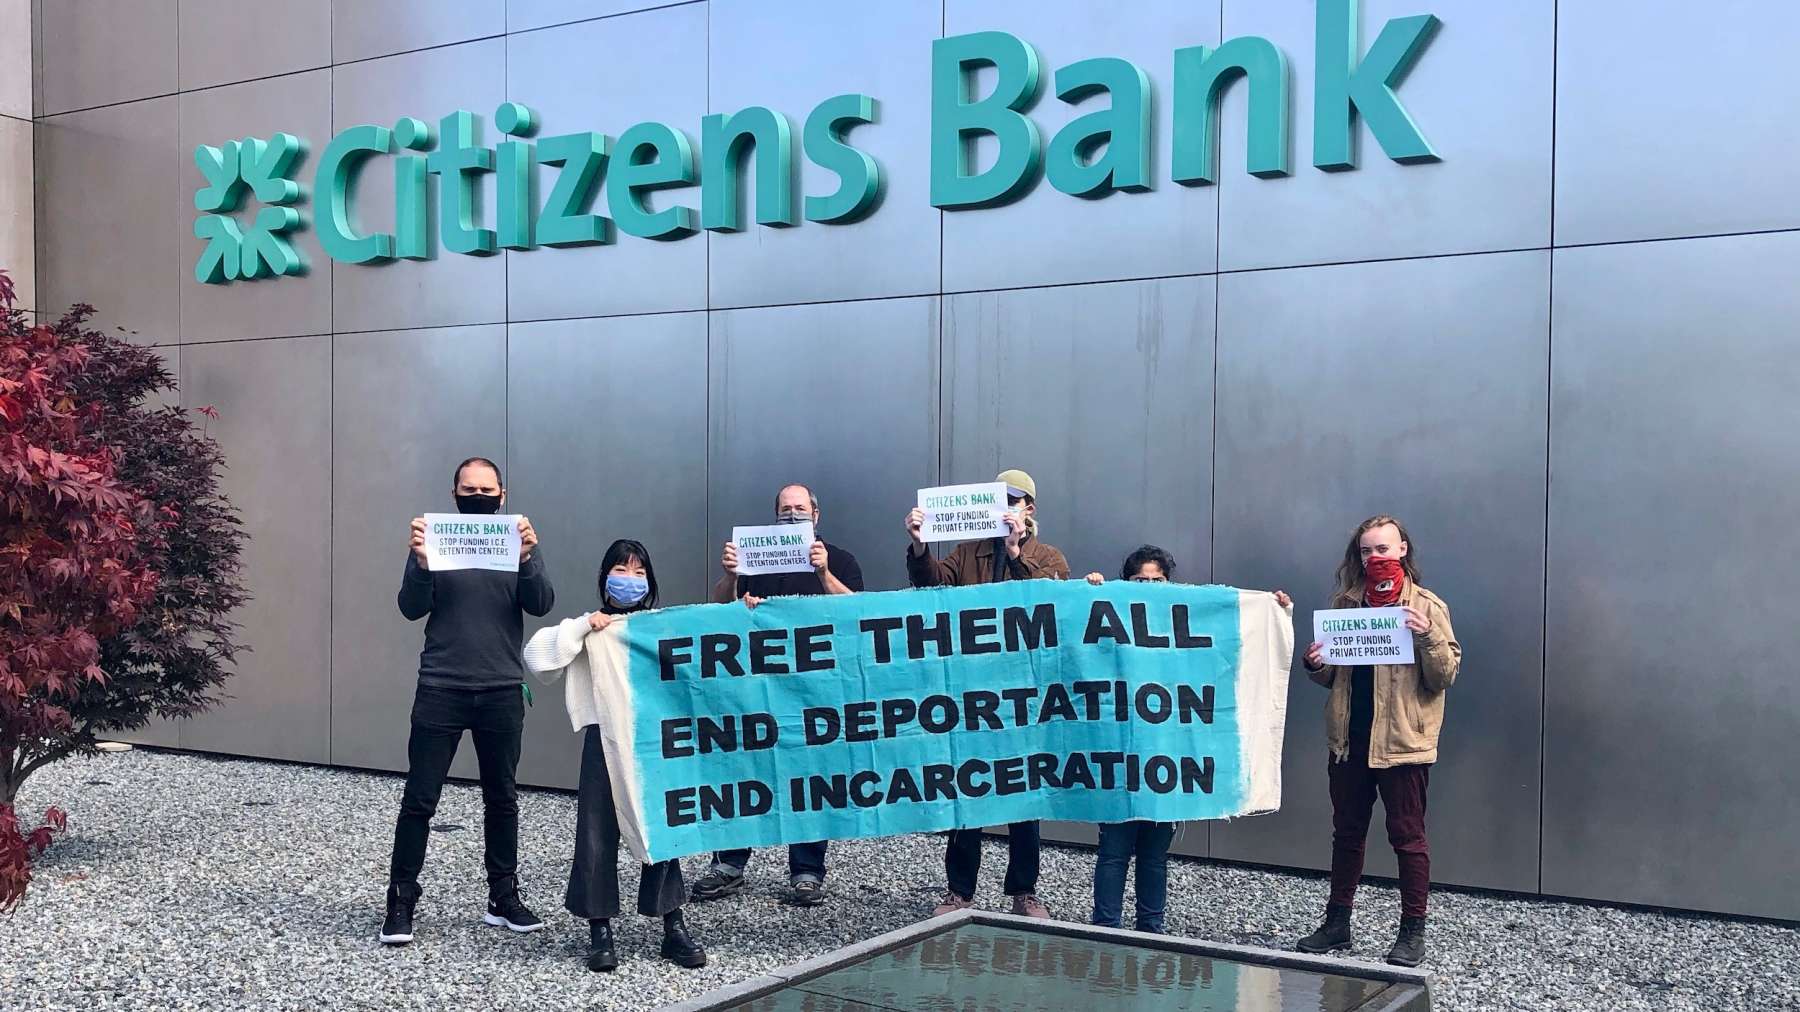 Shame on Citizens campaign calls on Citizens Bank to divest from private prisons and ICE